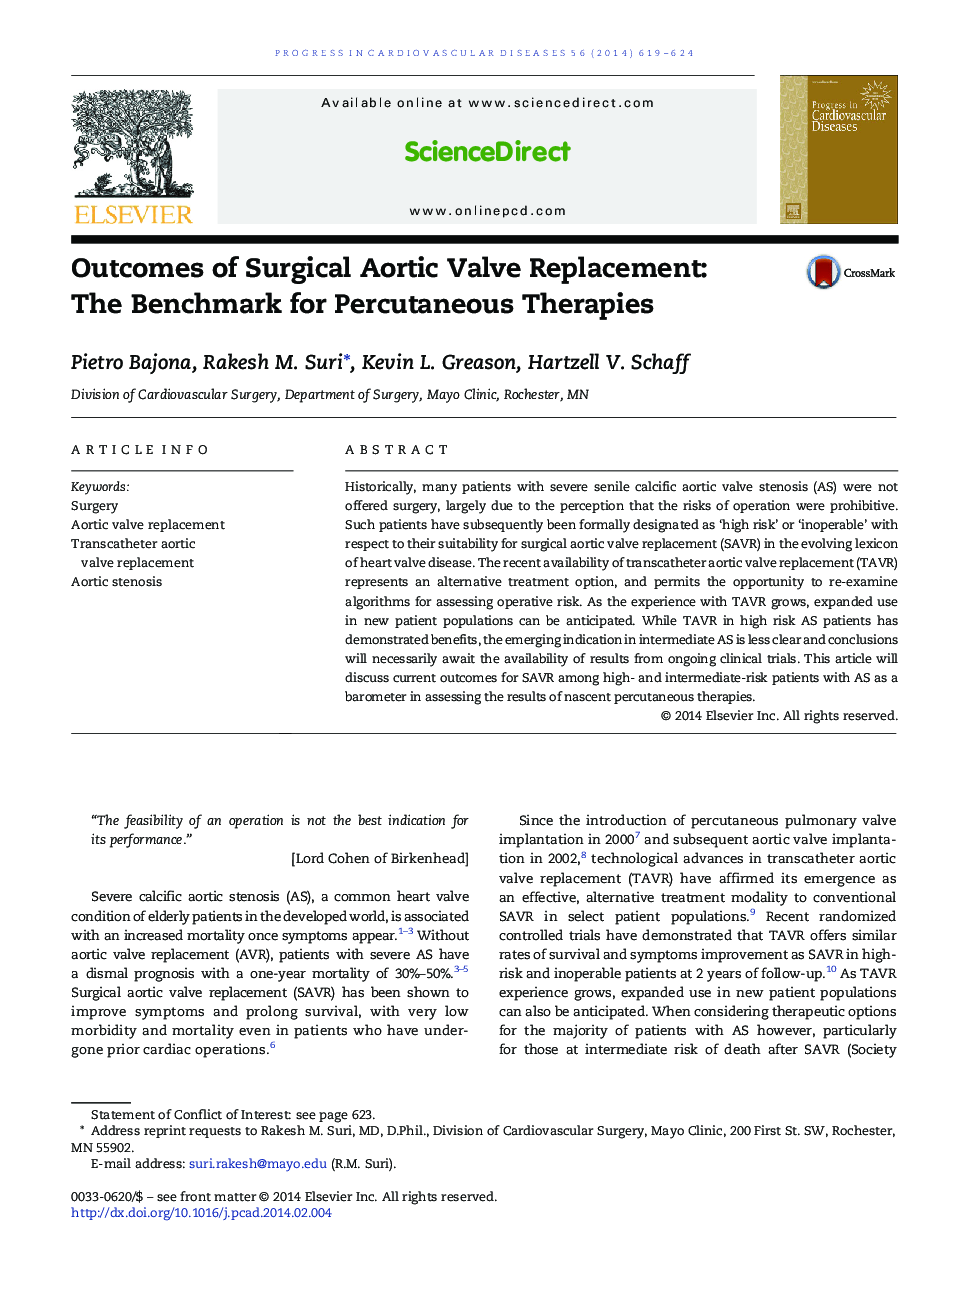 Outcomes of Surgical Aortic Valve Replacement: The Benchmark for Percutaneous Therapies 